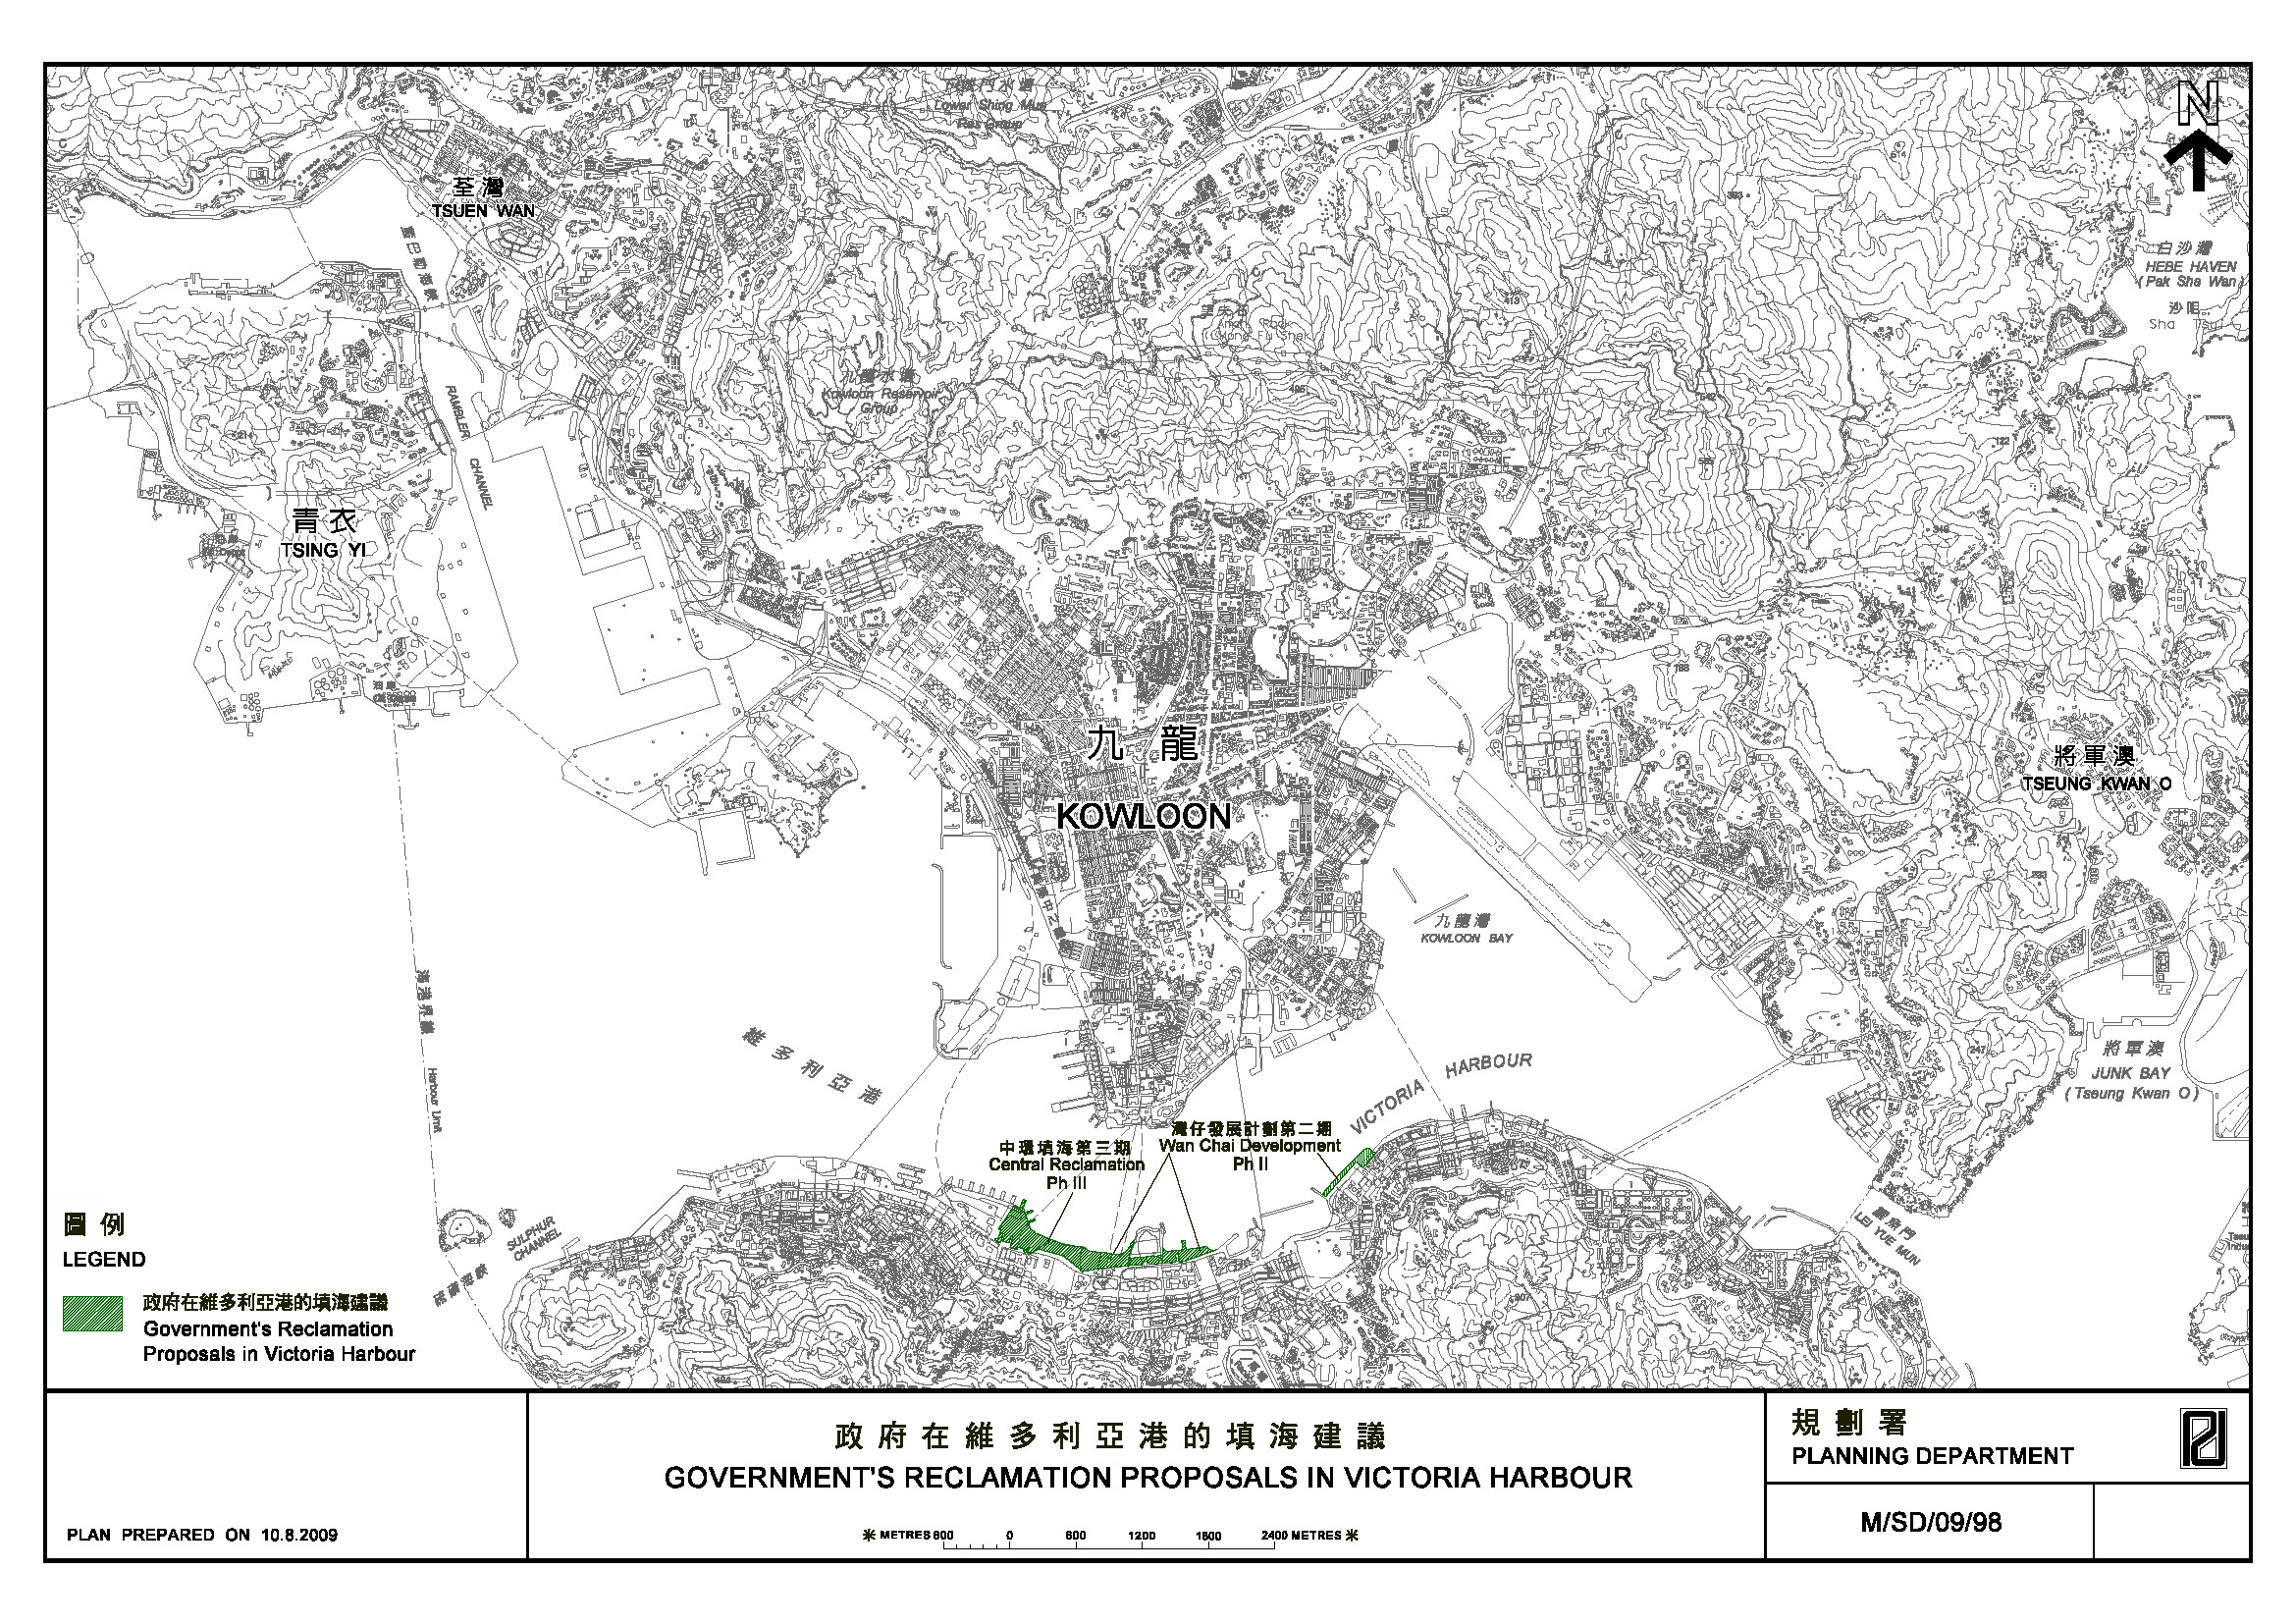 Reclamation Proposals in Victoria Harbour